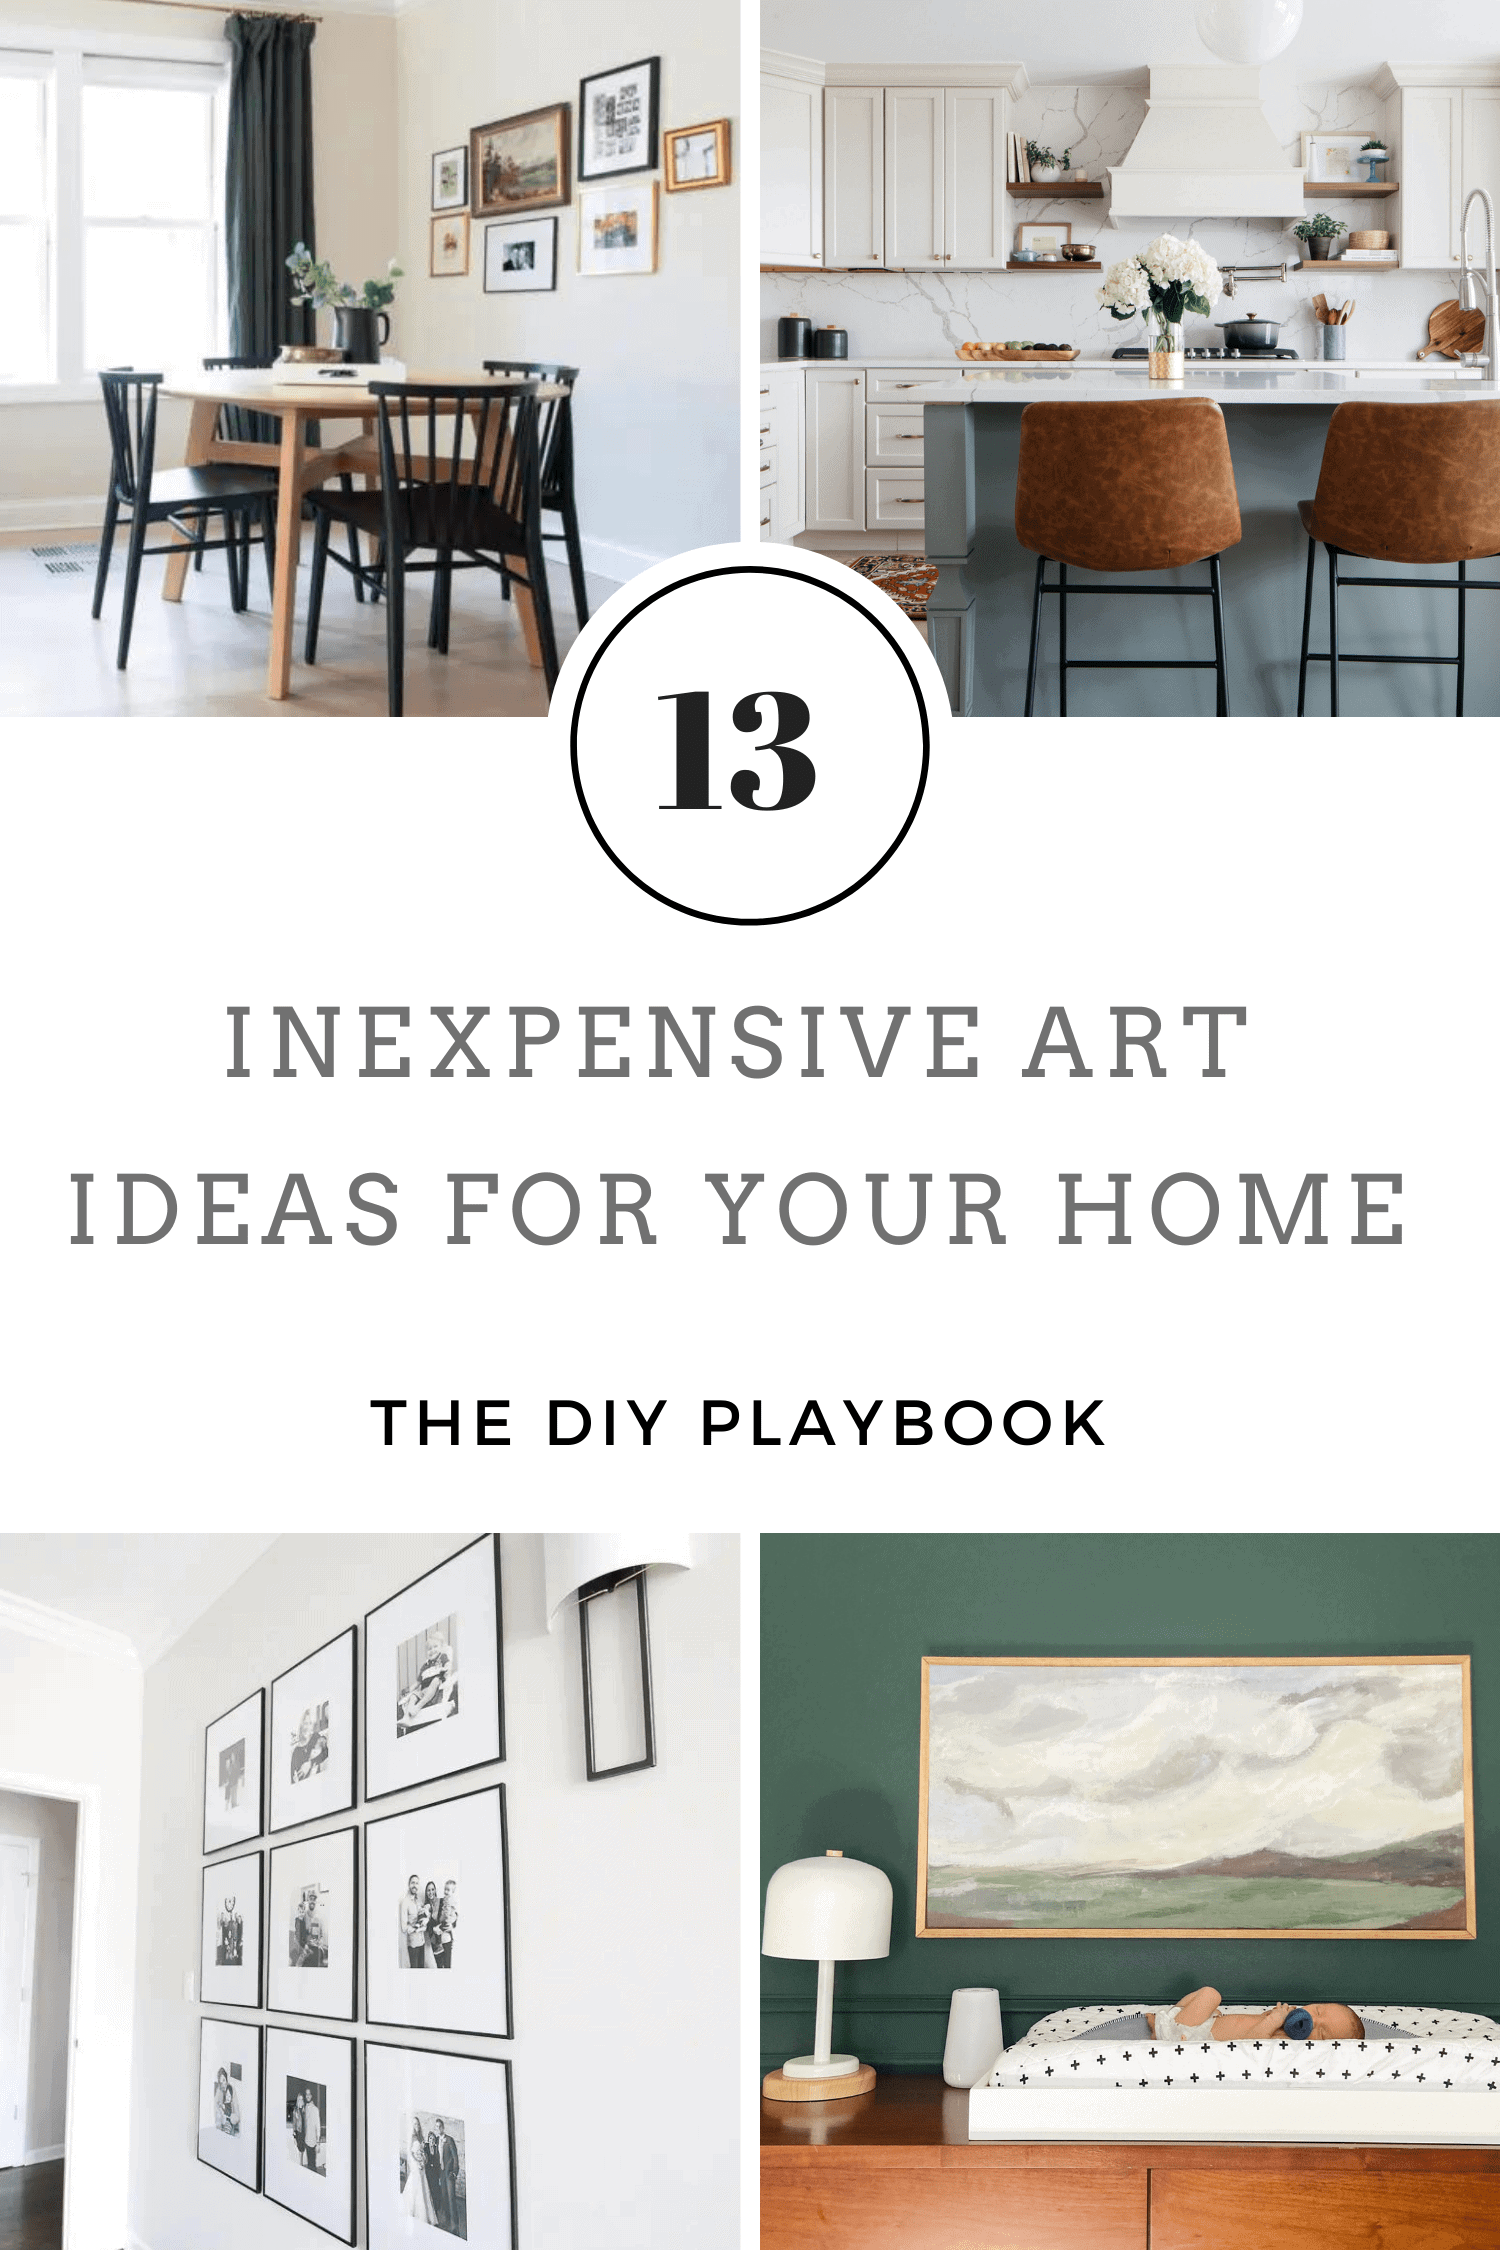 Inexpensive art ideas for your home